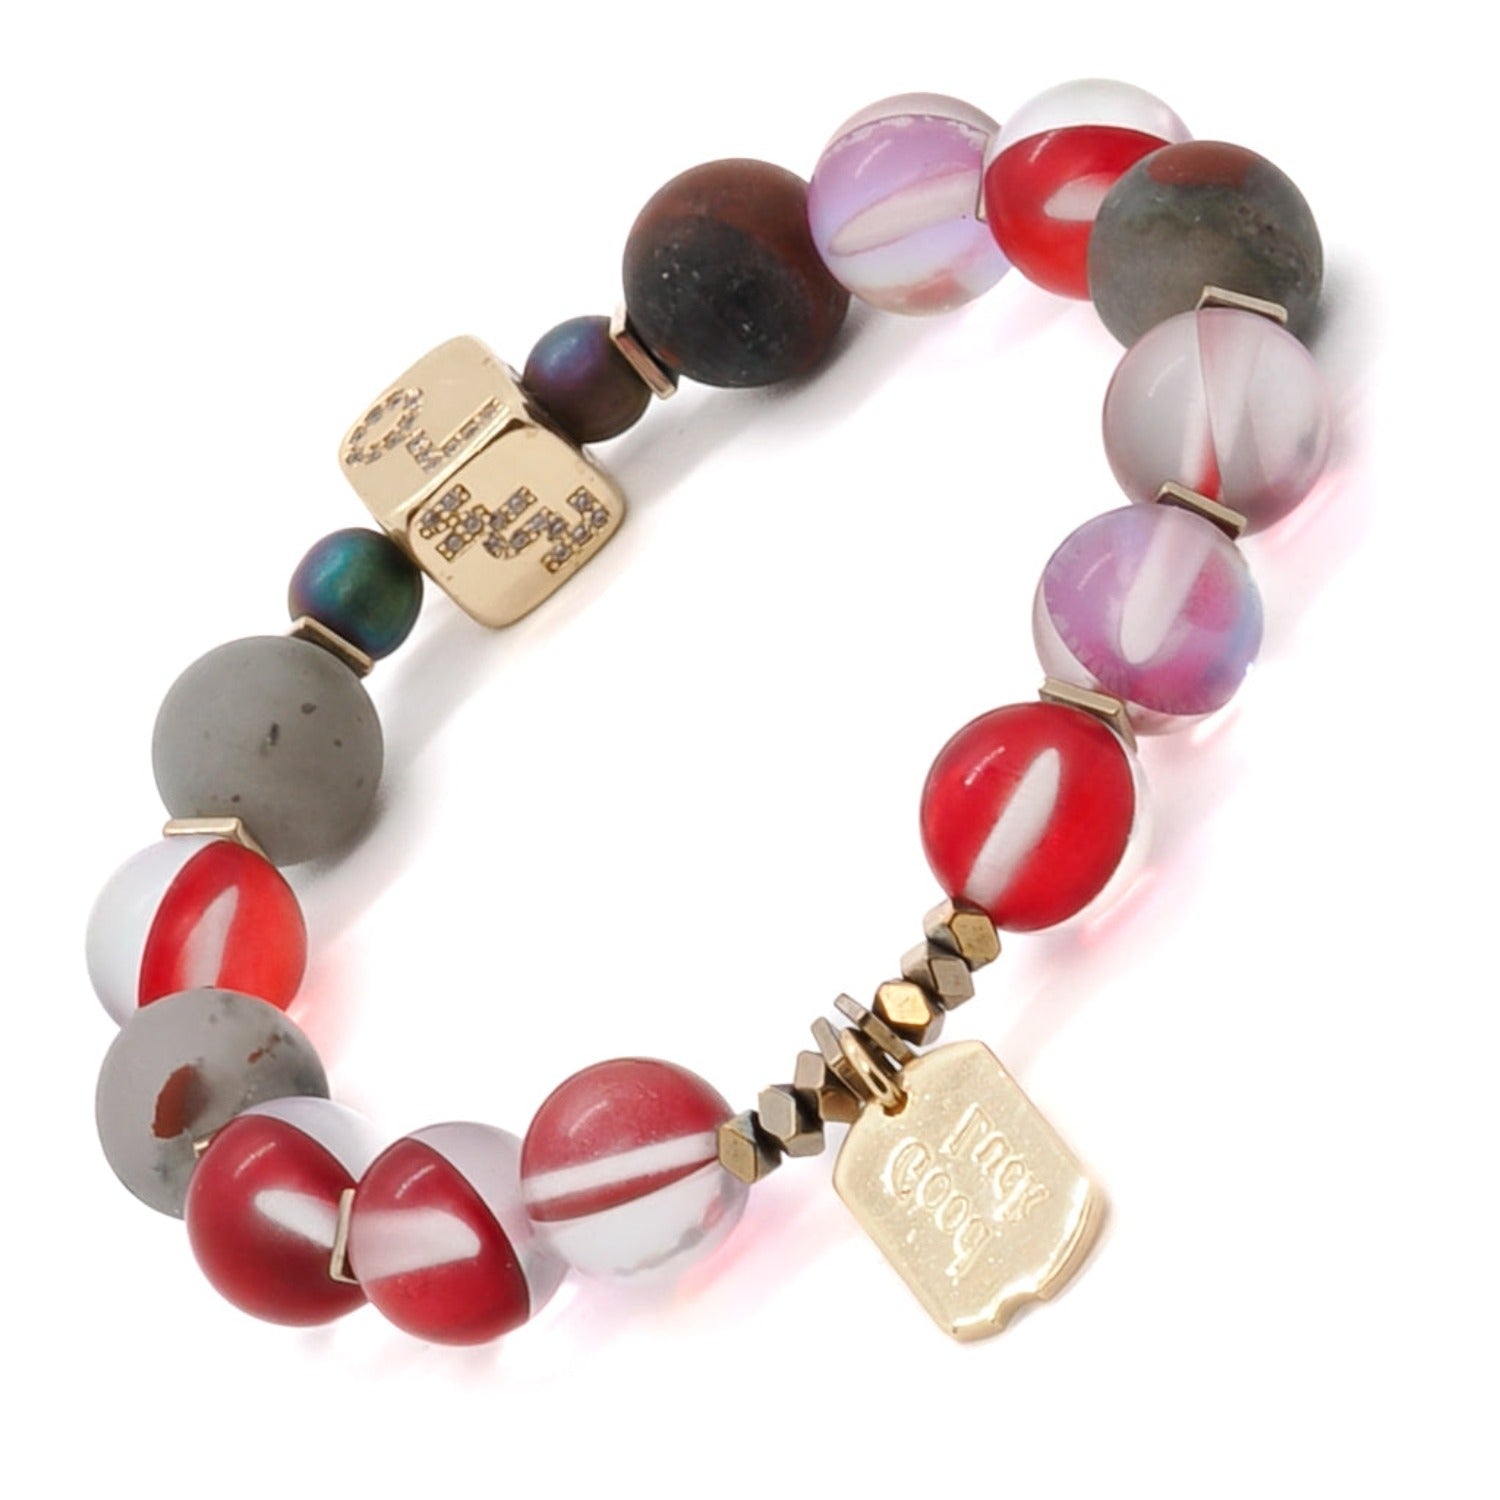 Explore the symbolism of good fortune with the Red &amp; Gold Good Luck Bracelet, featuring red color cat eye stone beads and gold accents.